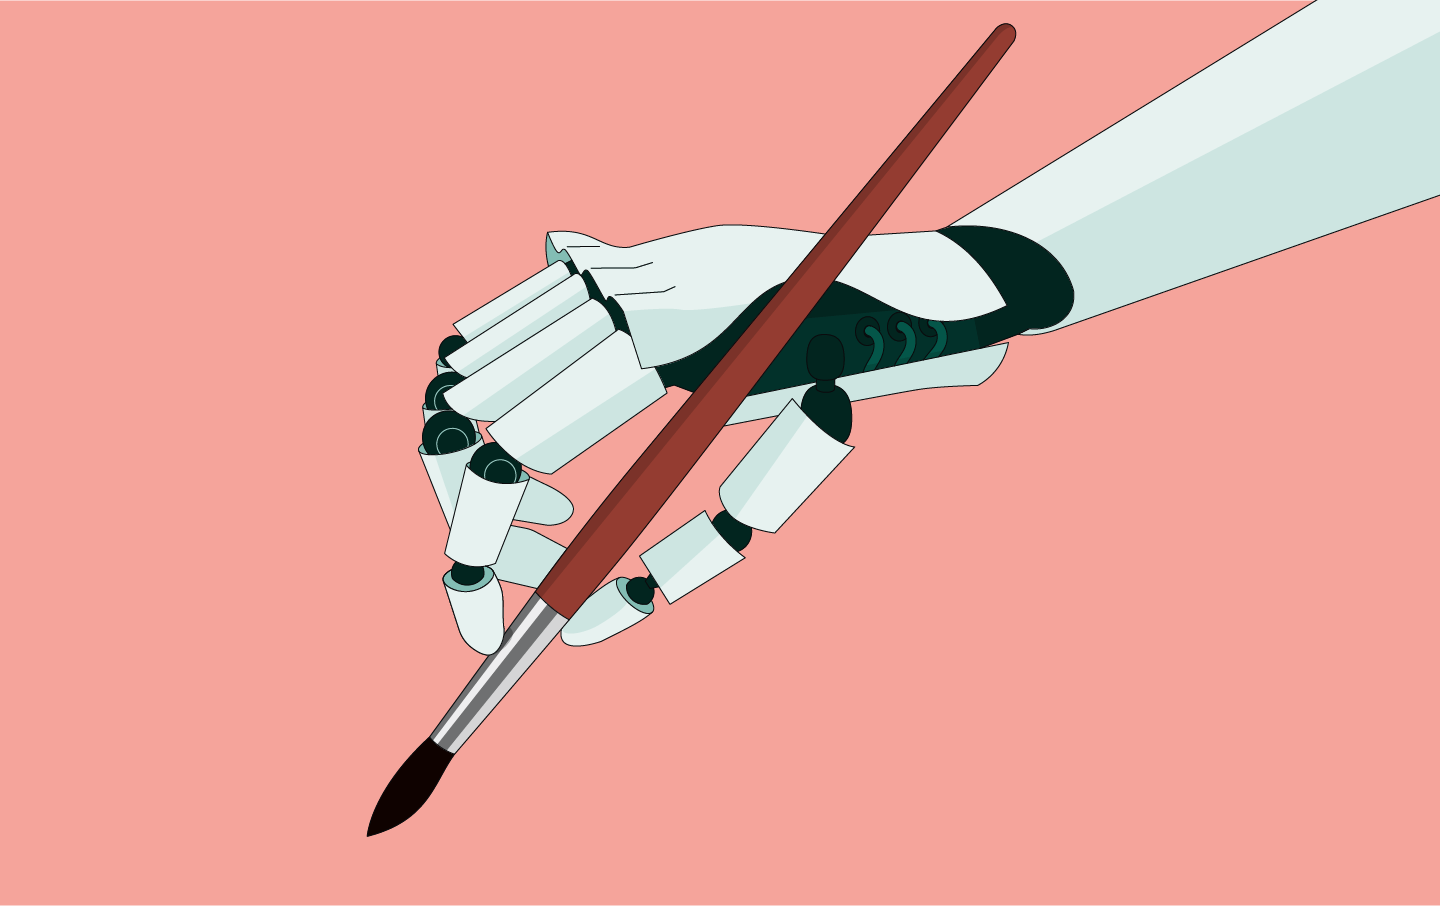 Robot hand holding a paintbrush